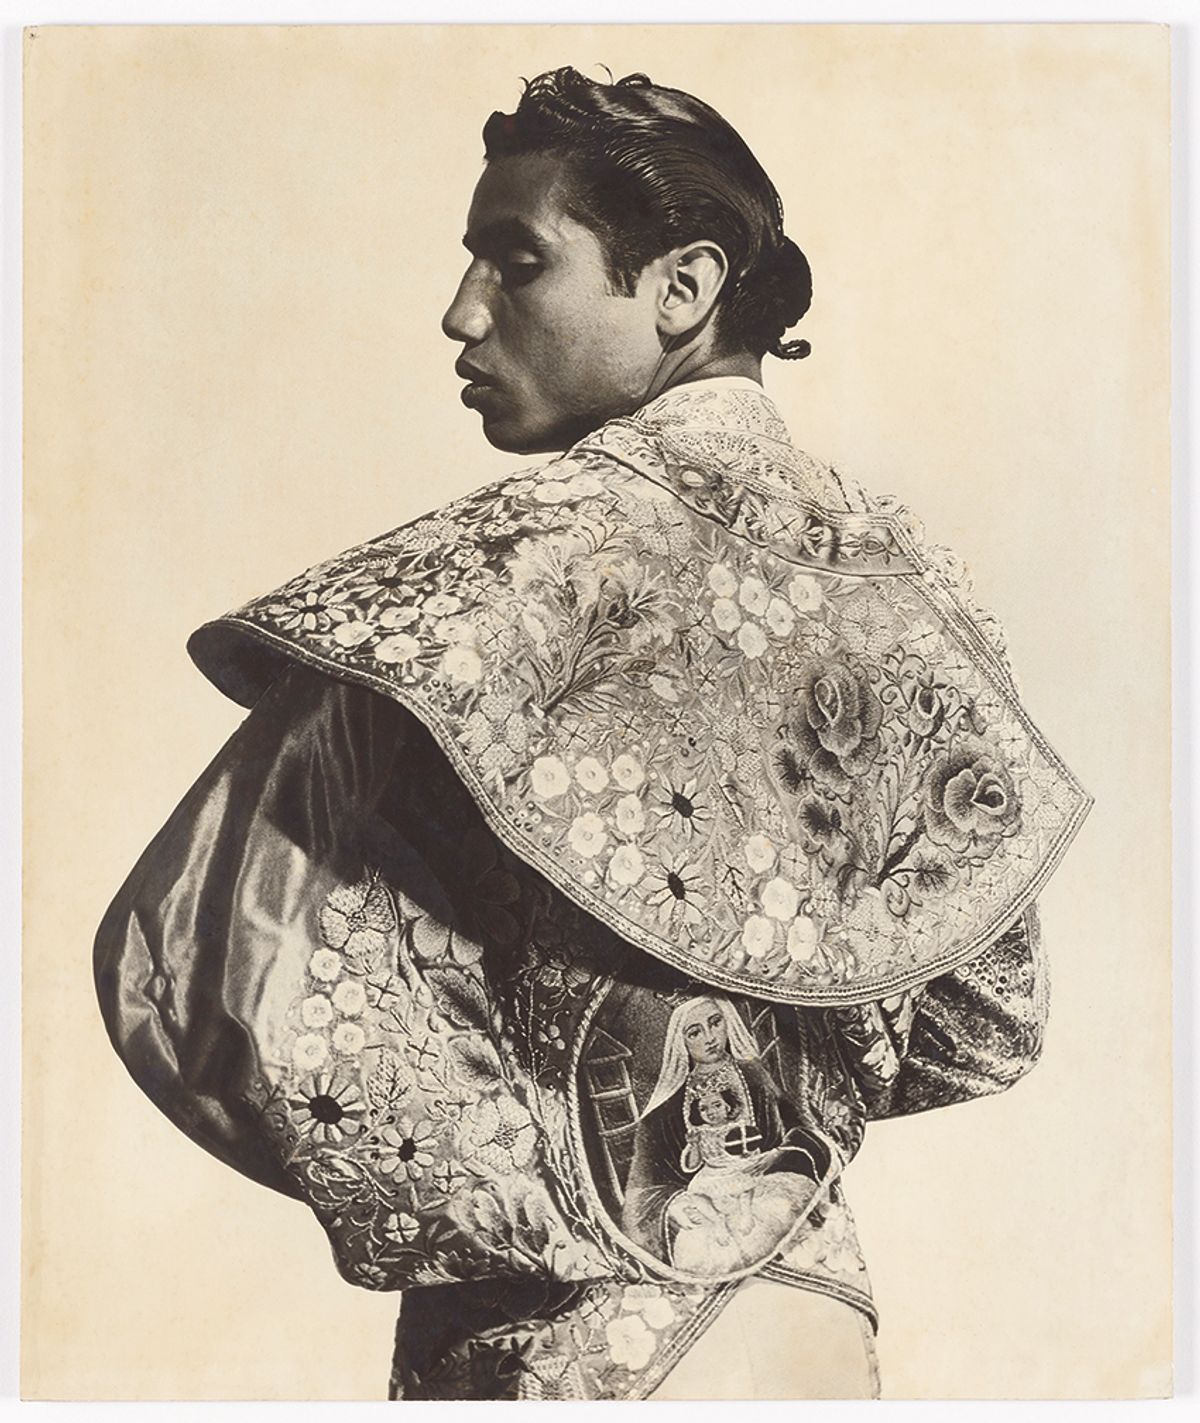 Alfredo Boulton’s 1952 photograph, Luis Sánchez Olivares, “El Diamante Negro”; the artist built networks with institutions including New York’s Museum of Modern Art
© J. Paul Getty Trust, Getty Research Institute, Los Angeles
